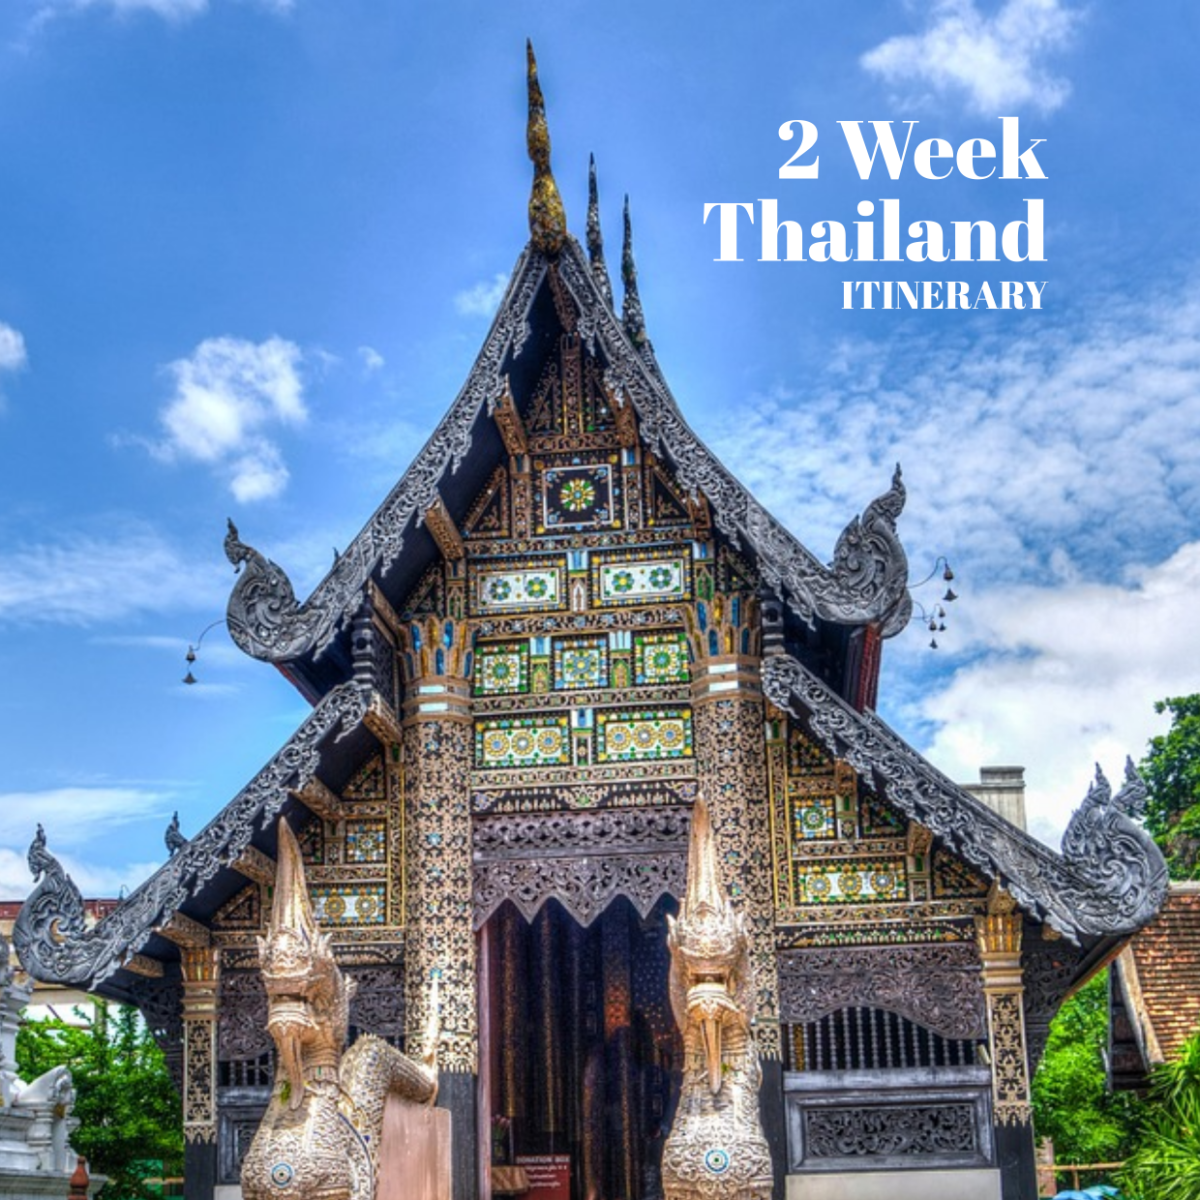 2 Week Thailand Itinerary Template